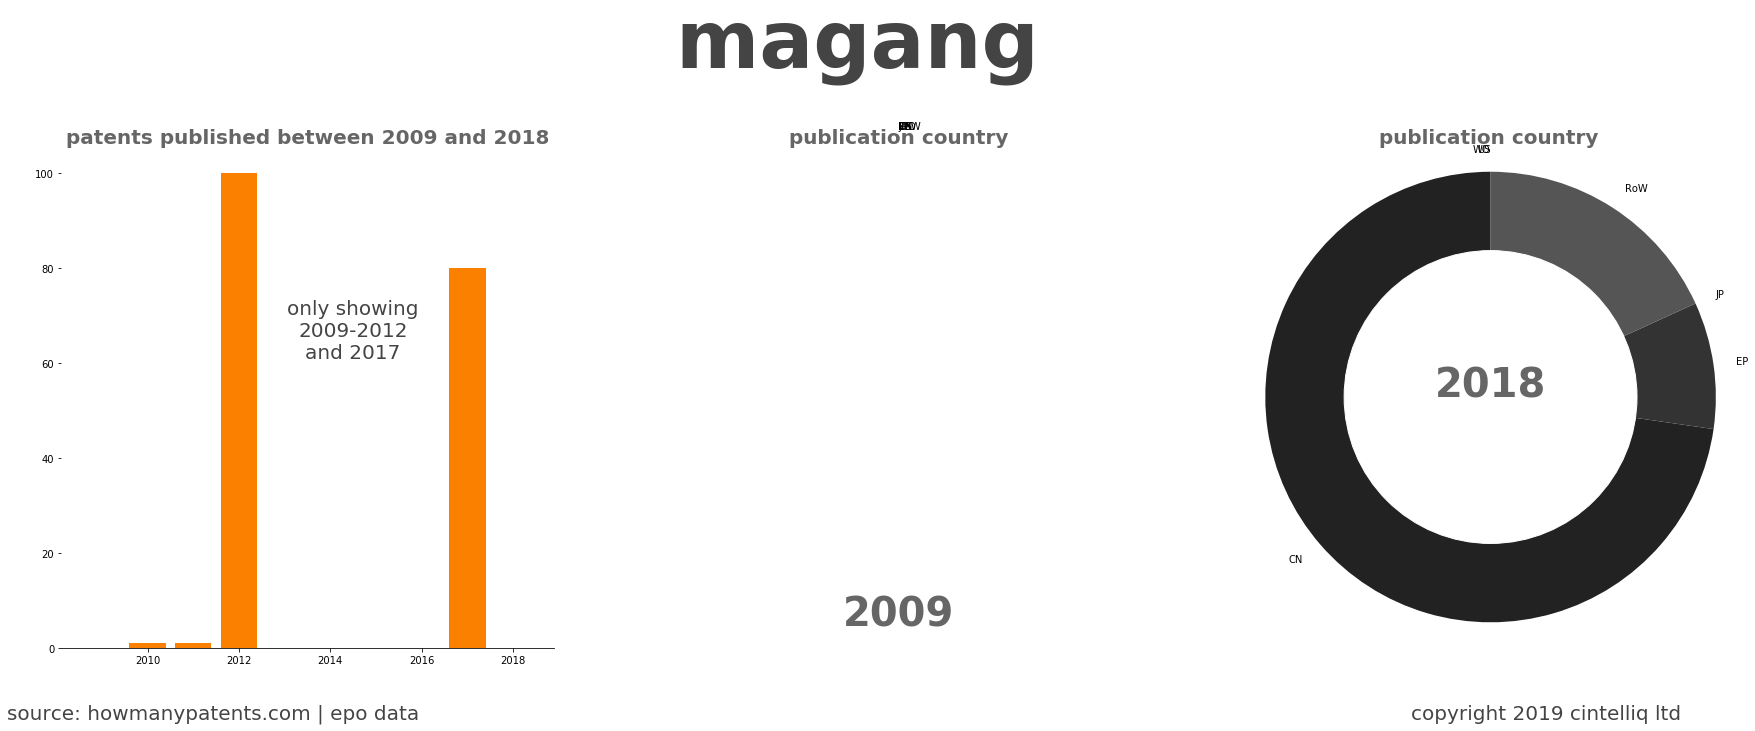 summary of patents for Magang 